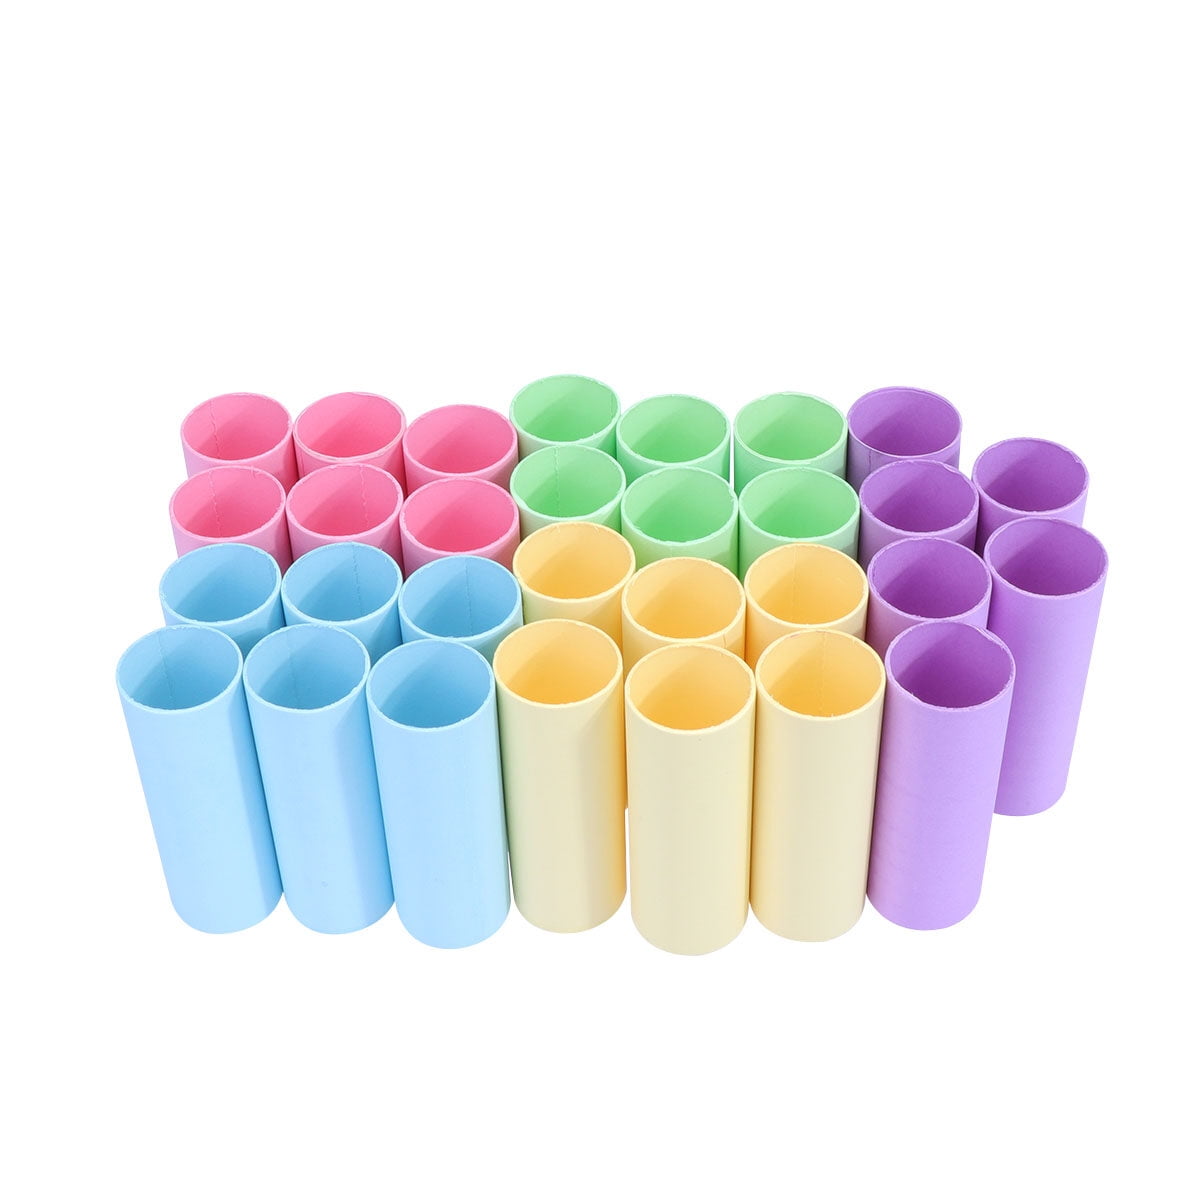 60 PCS 1.6 x 4 Inches Craft Rolls Tubes, Cardboard Tubes (6 Colors), Craft  Paper Roll Tubes for Creative DIY Projects (Pink, Yellow, Blue, Green